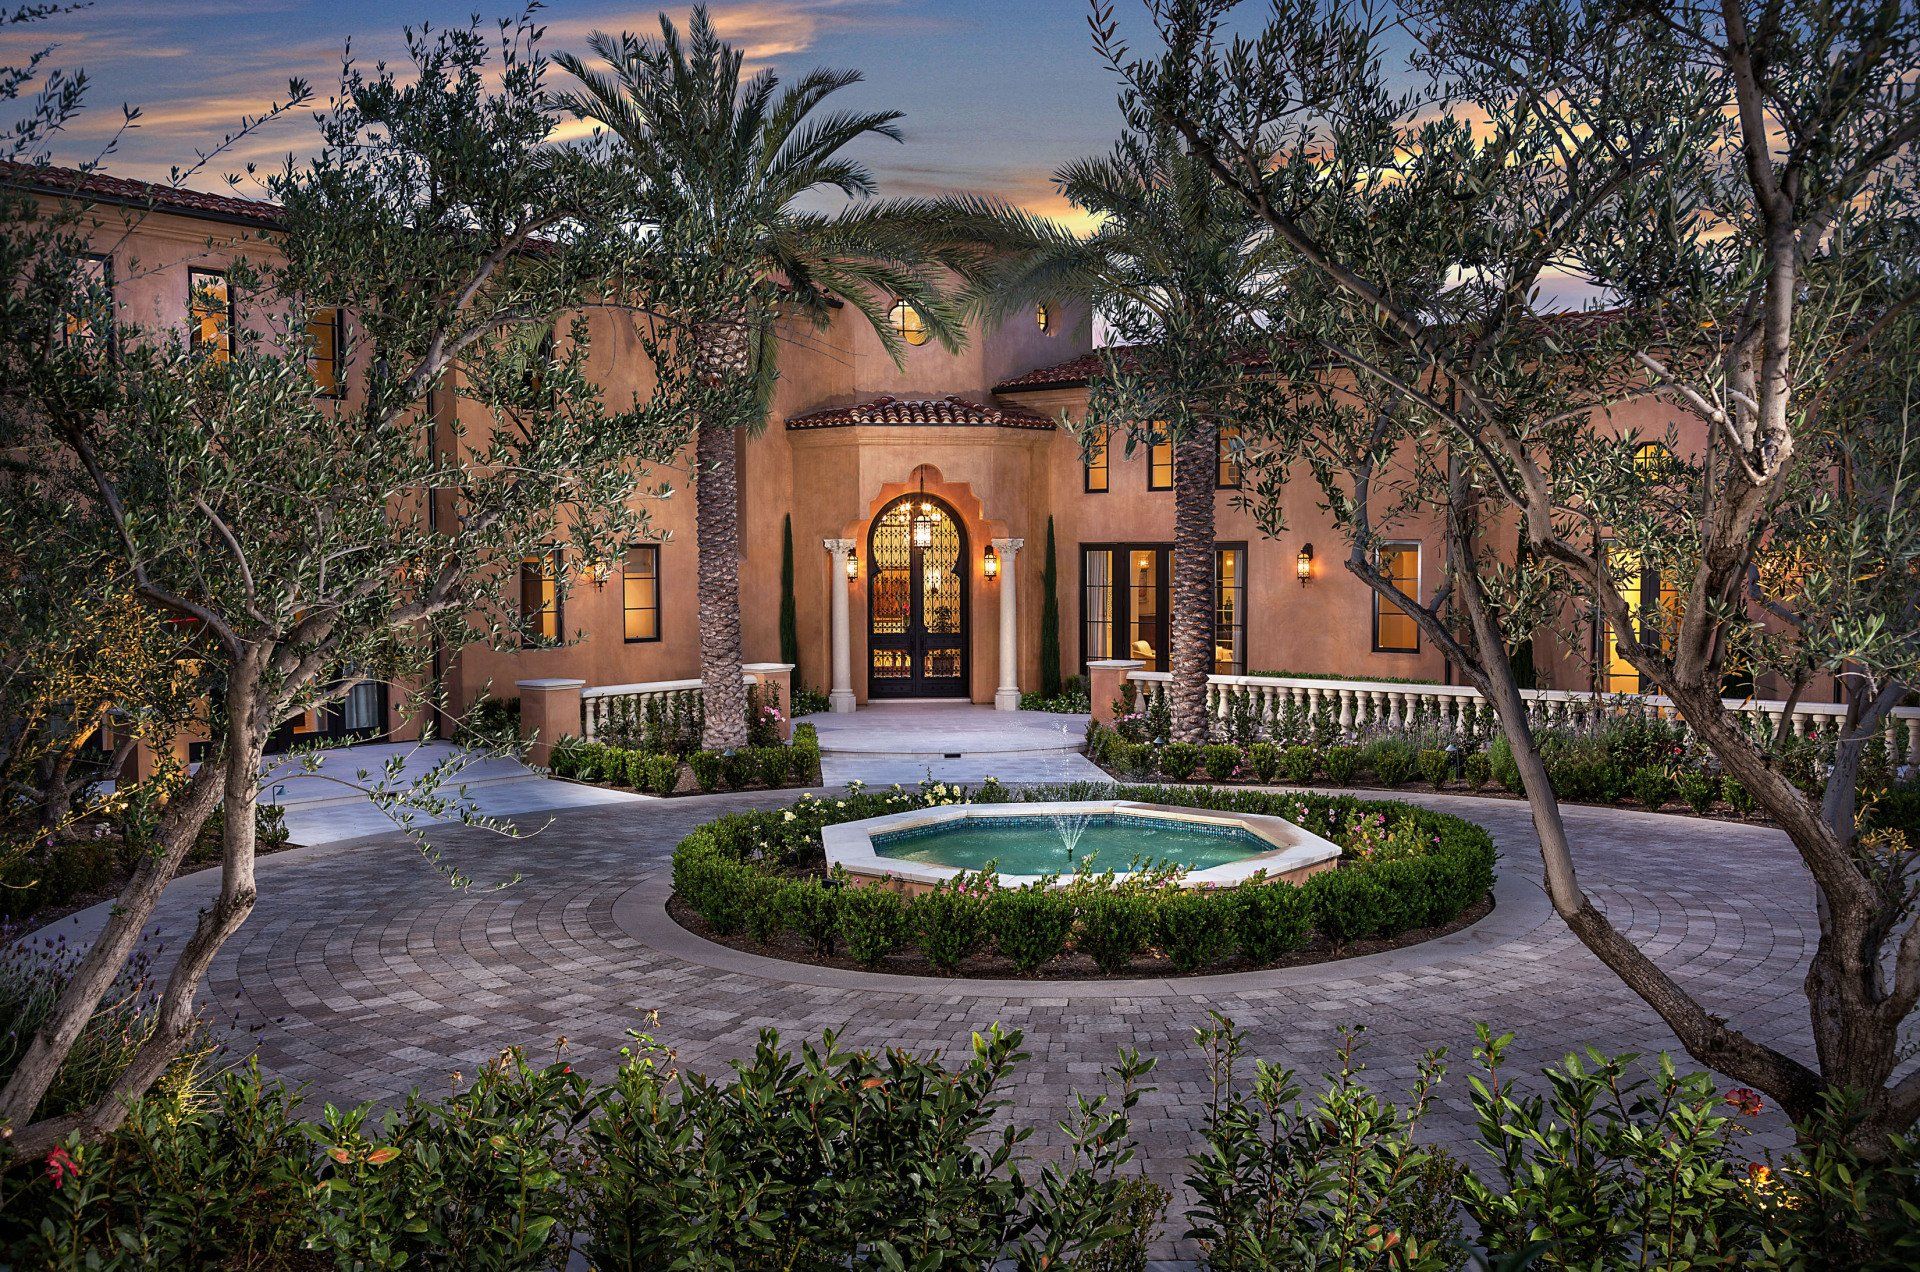 Exterior of a MOROCCAN VILLA located in Orange County designed by Oatman Architects